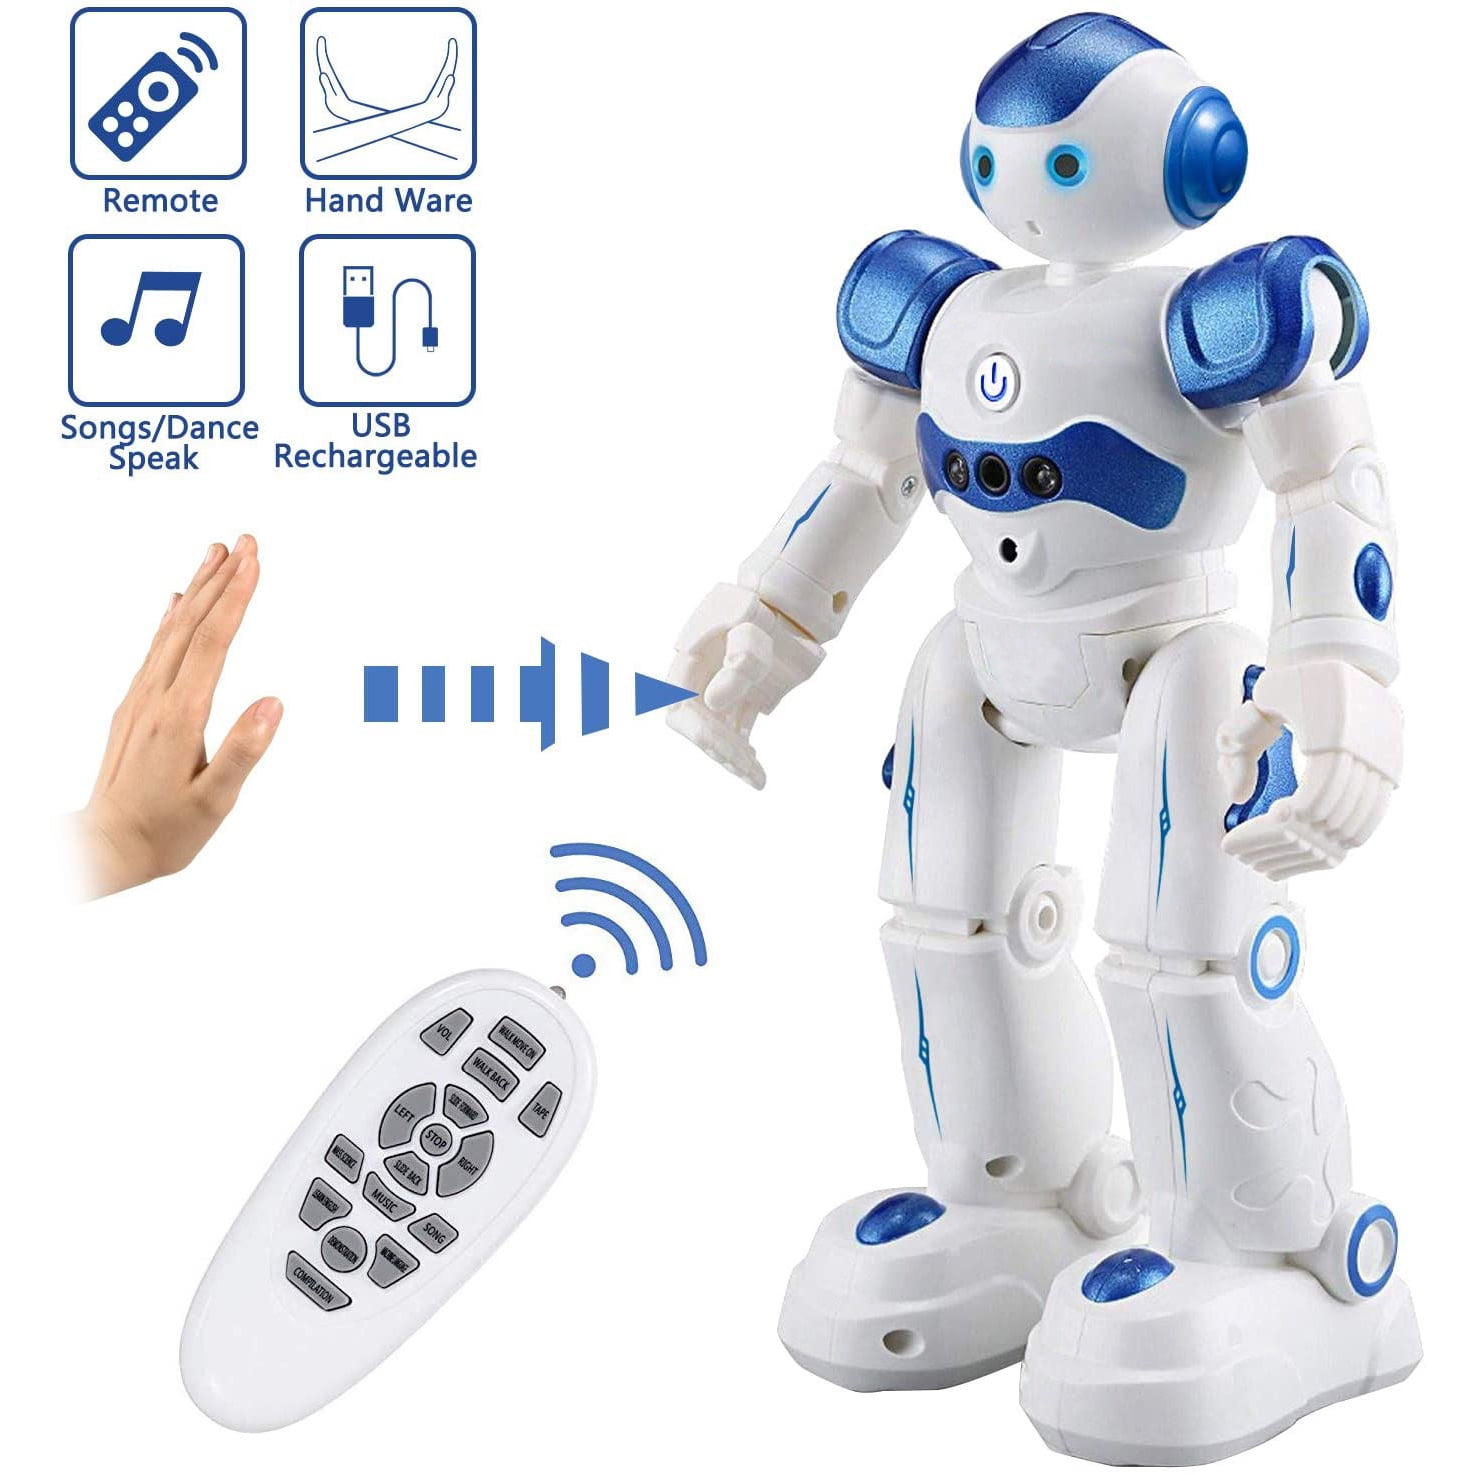 Smart Robot Toys Remote Control Intelligent Robot Xmas Gift For Girls Kids Child 